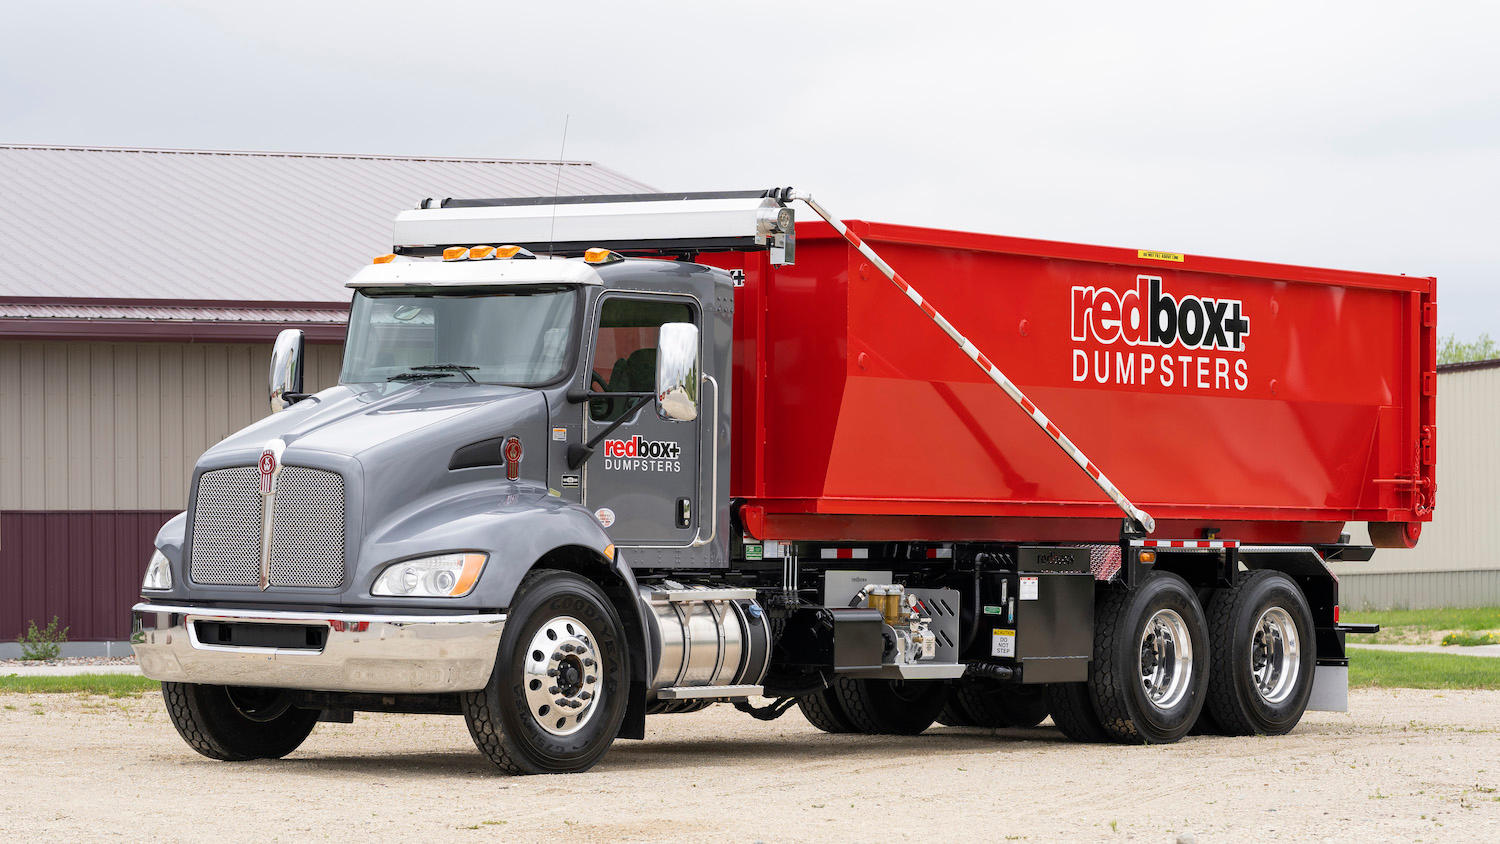 Dumpster rental service in the Central New Jersey area